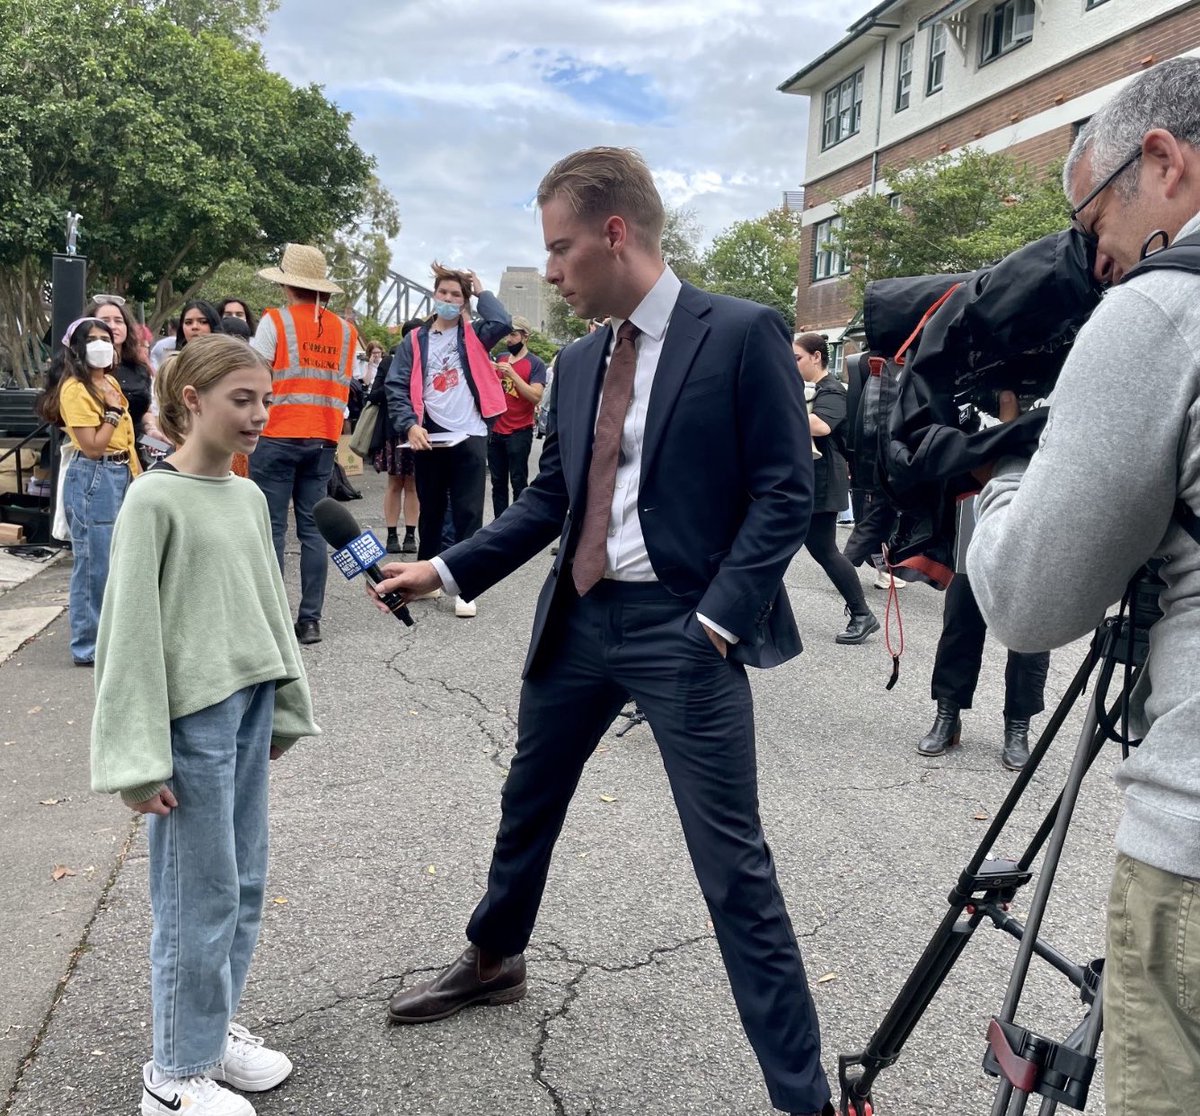 Disturbing image. BL leg posture reveals mind’s intent. Journo interviews Ella of the CC protest. There is NO REASON for this stance in front of a child .Takes up space looks larger, dominant. Draws att to genitals usually in males a sexual display. Hand in pocket. Don’t do this.